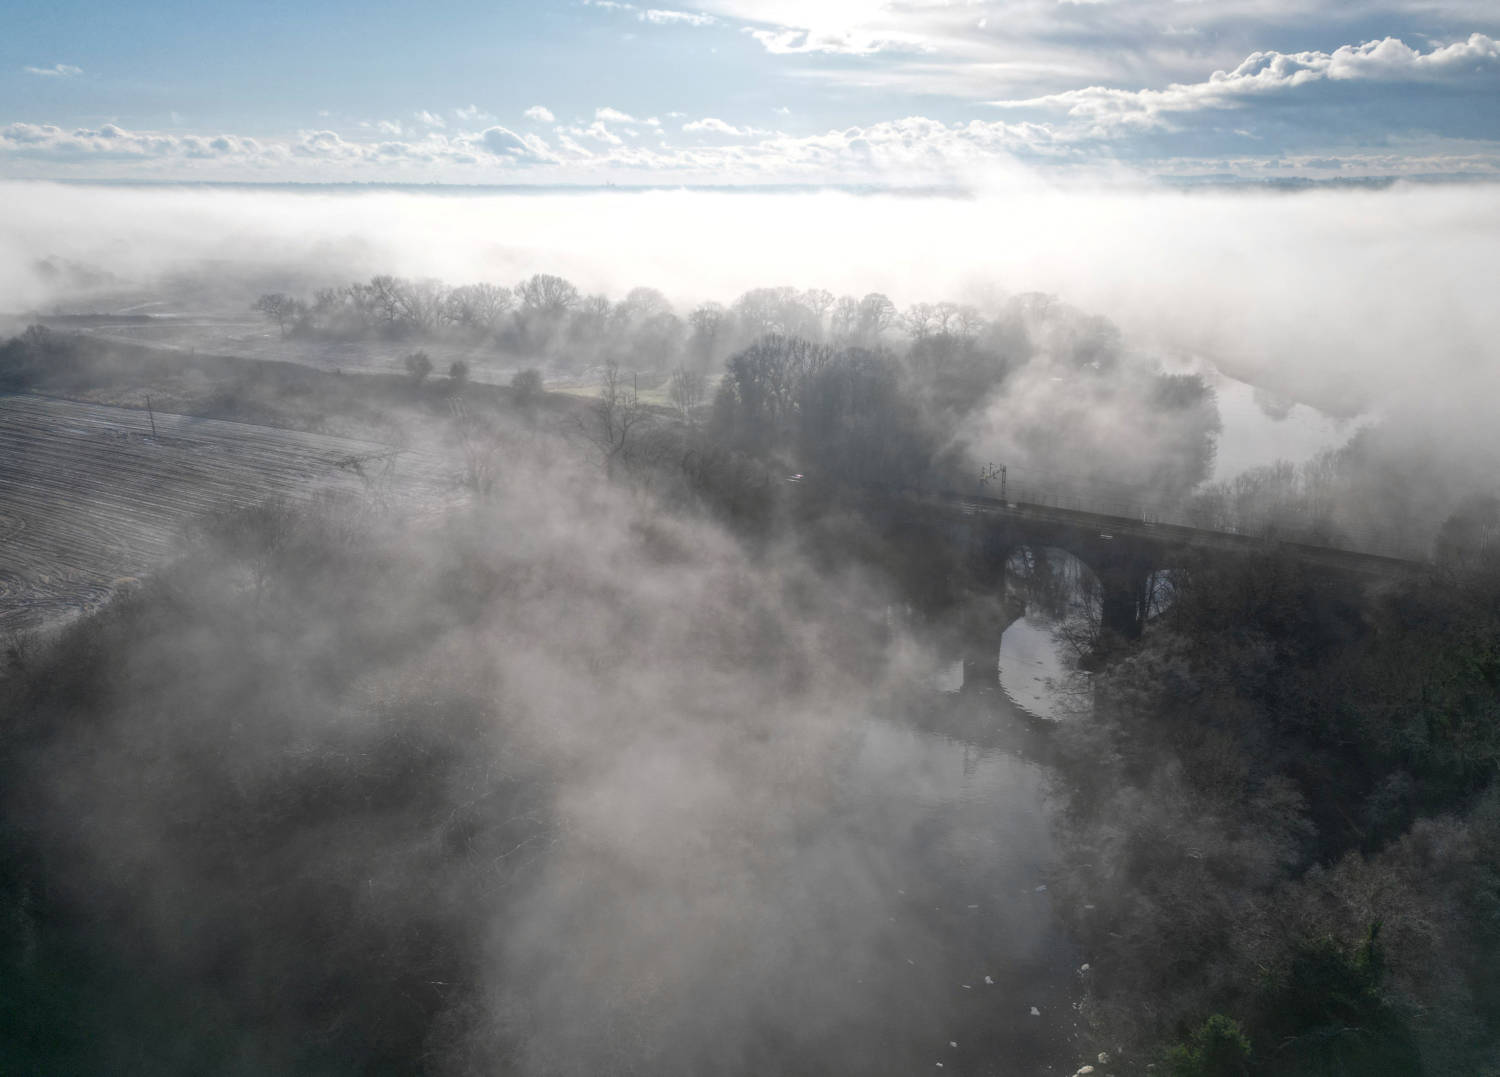 Fog Is Seen Over The River Weaver, Cheshire